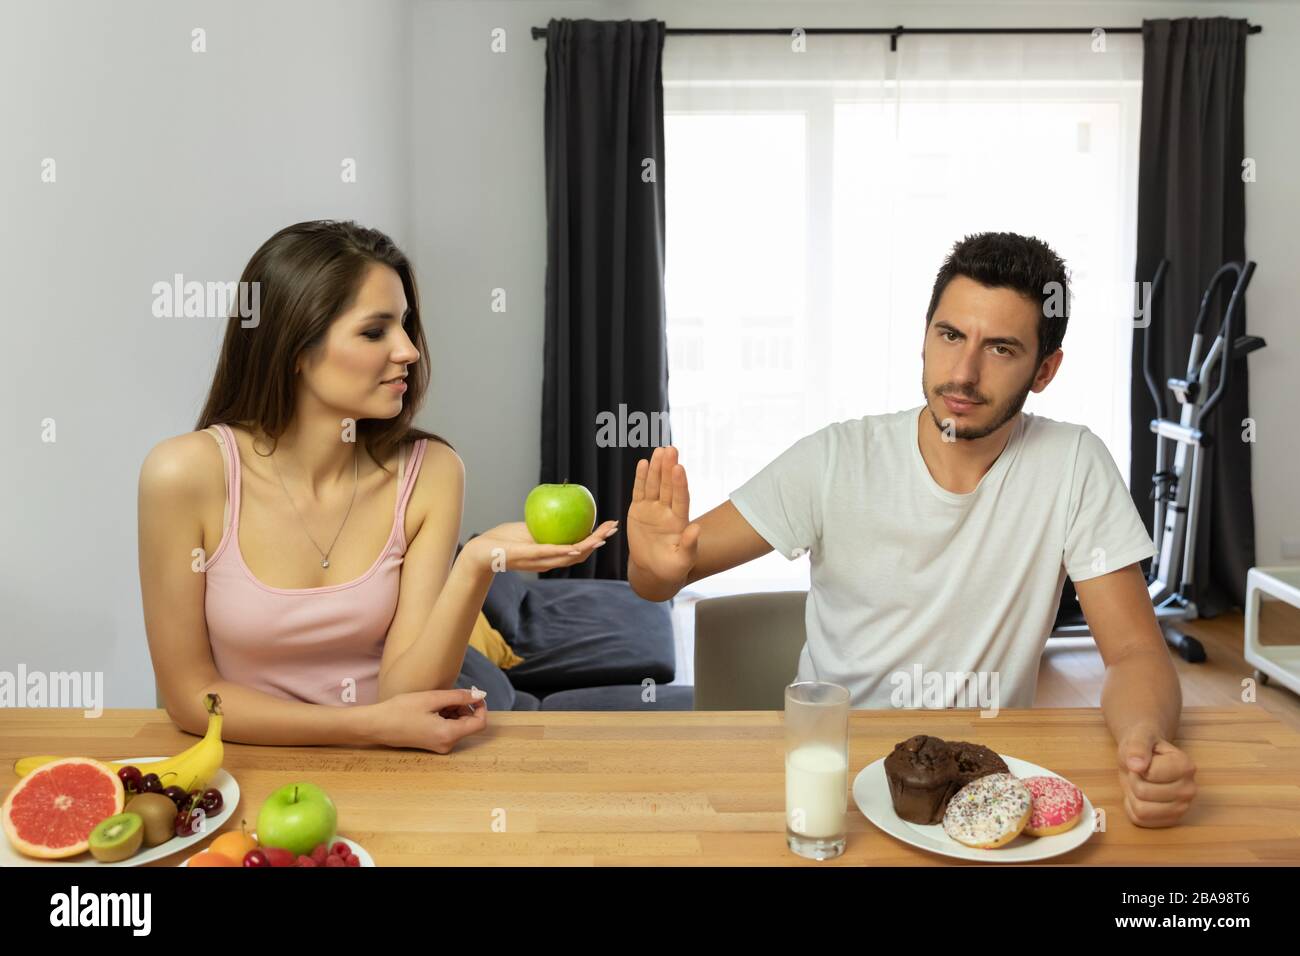 A man leads a wrong lifestyle, he eats donuts with icing for breakfast. The girl offers him to try fresh fruits, but he refuses. The confrontation of Stock Photo